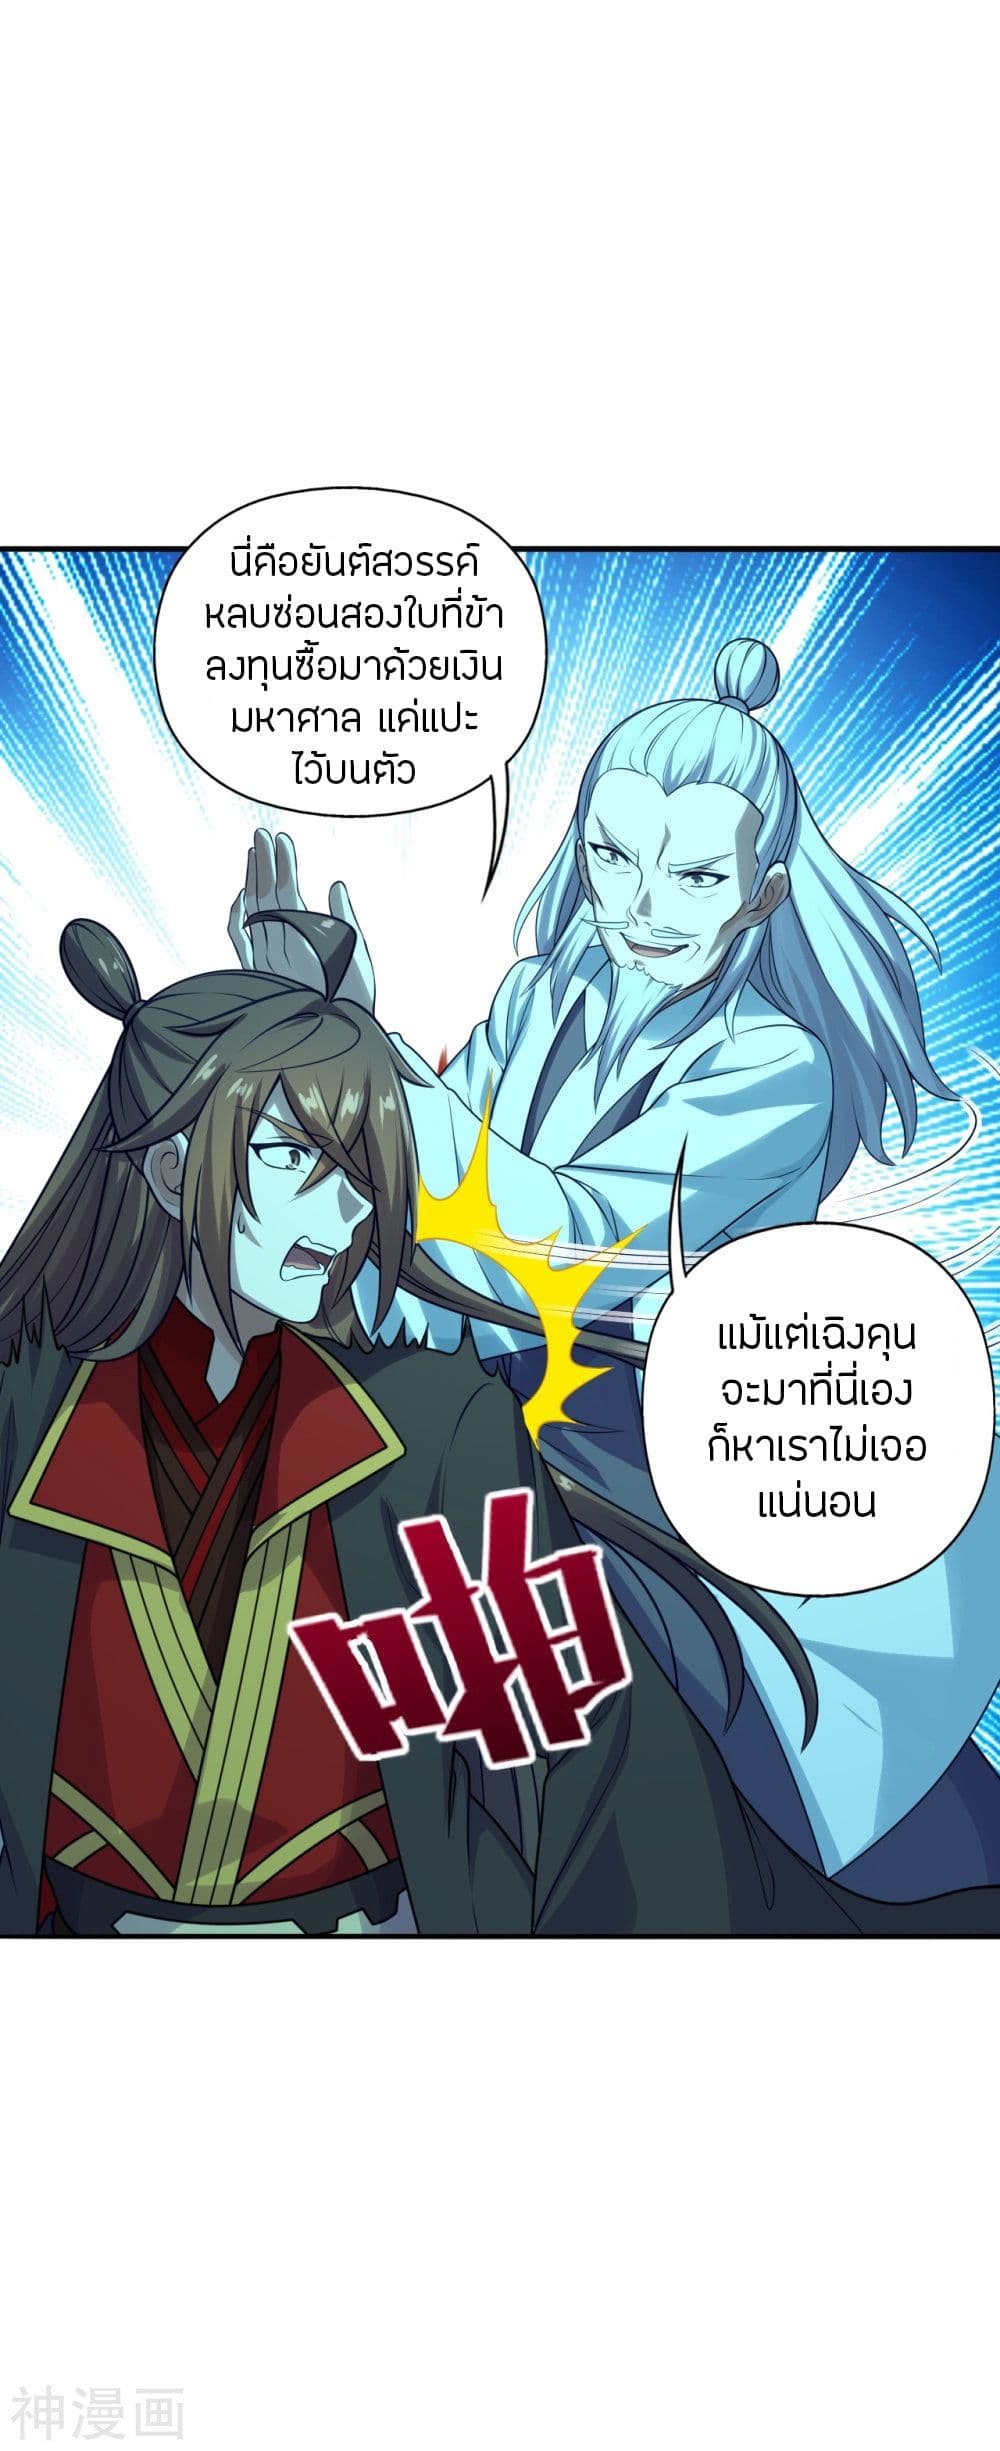 Banished Disciple's Counterattack เธเธฑเธเธฃเธเธฃเธฃเธ”เธดเน€เธเธตเธขเธเธขเธธเธ—เธ 239 (28)